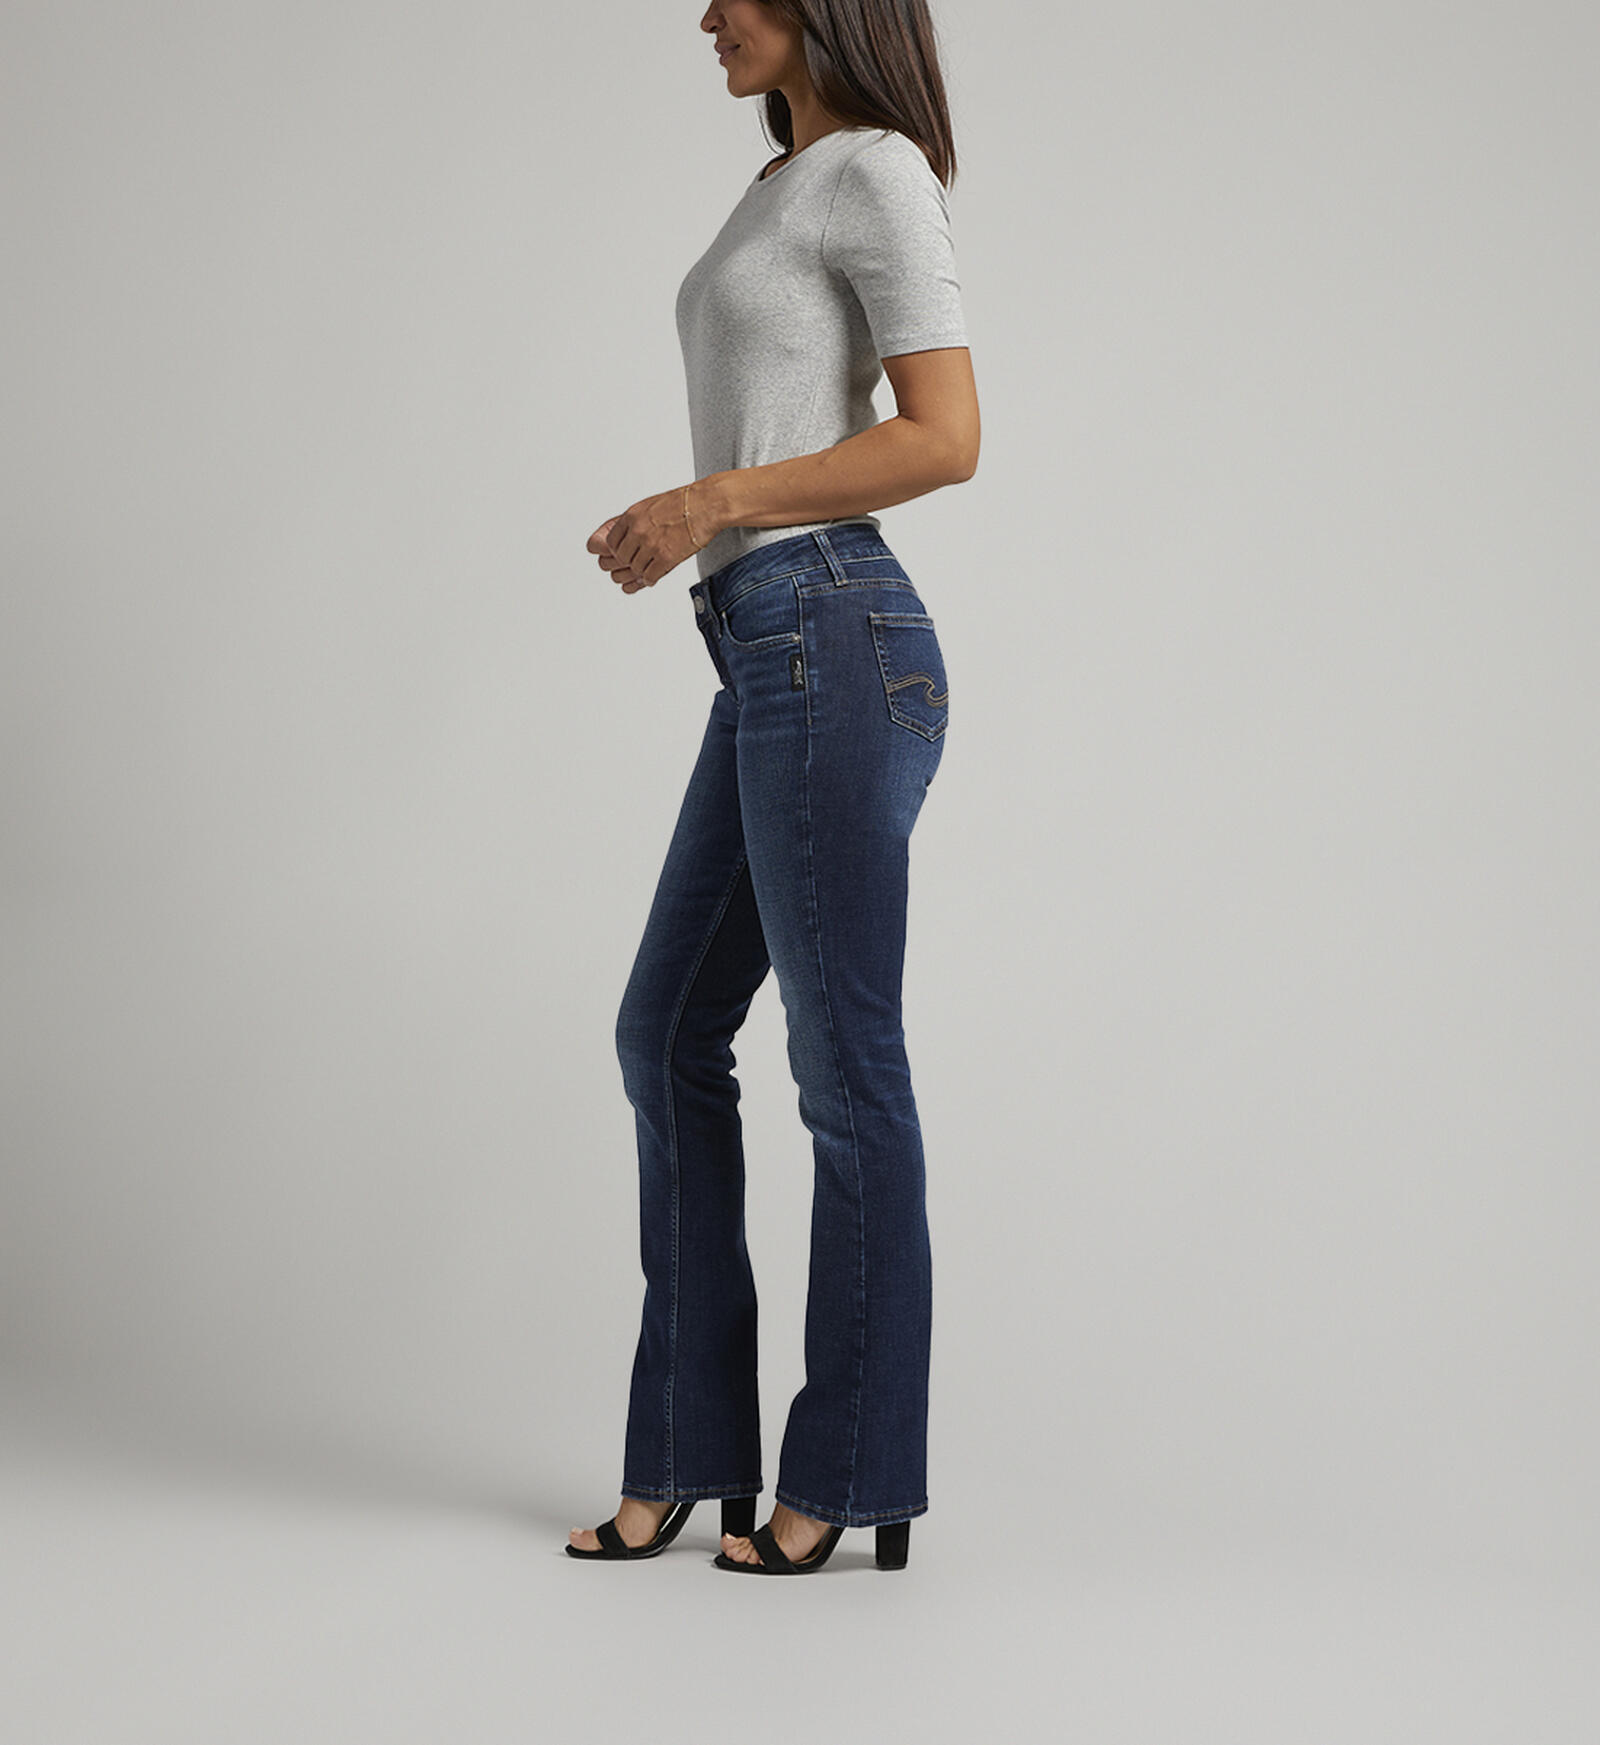 Buy Suki Mid Rise Slim Bootcut Jeans Plus Size for USD 59.00